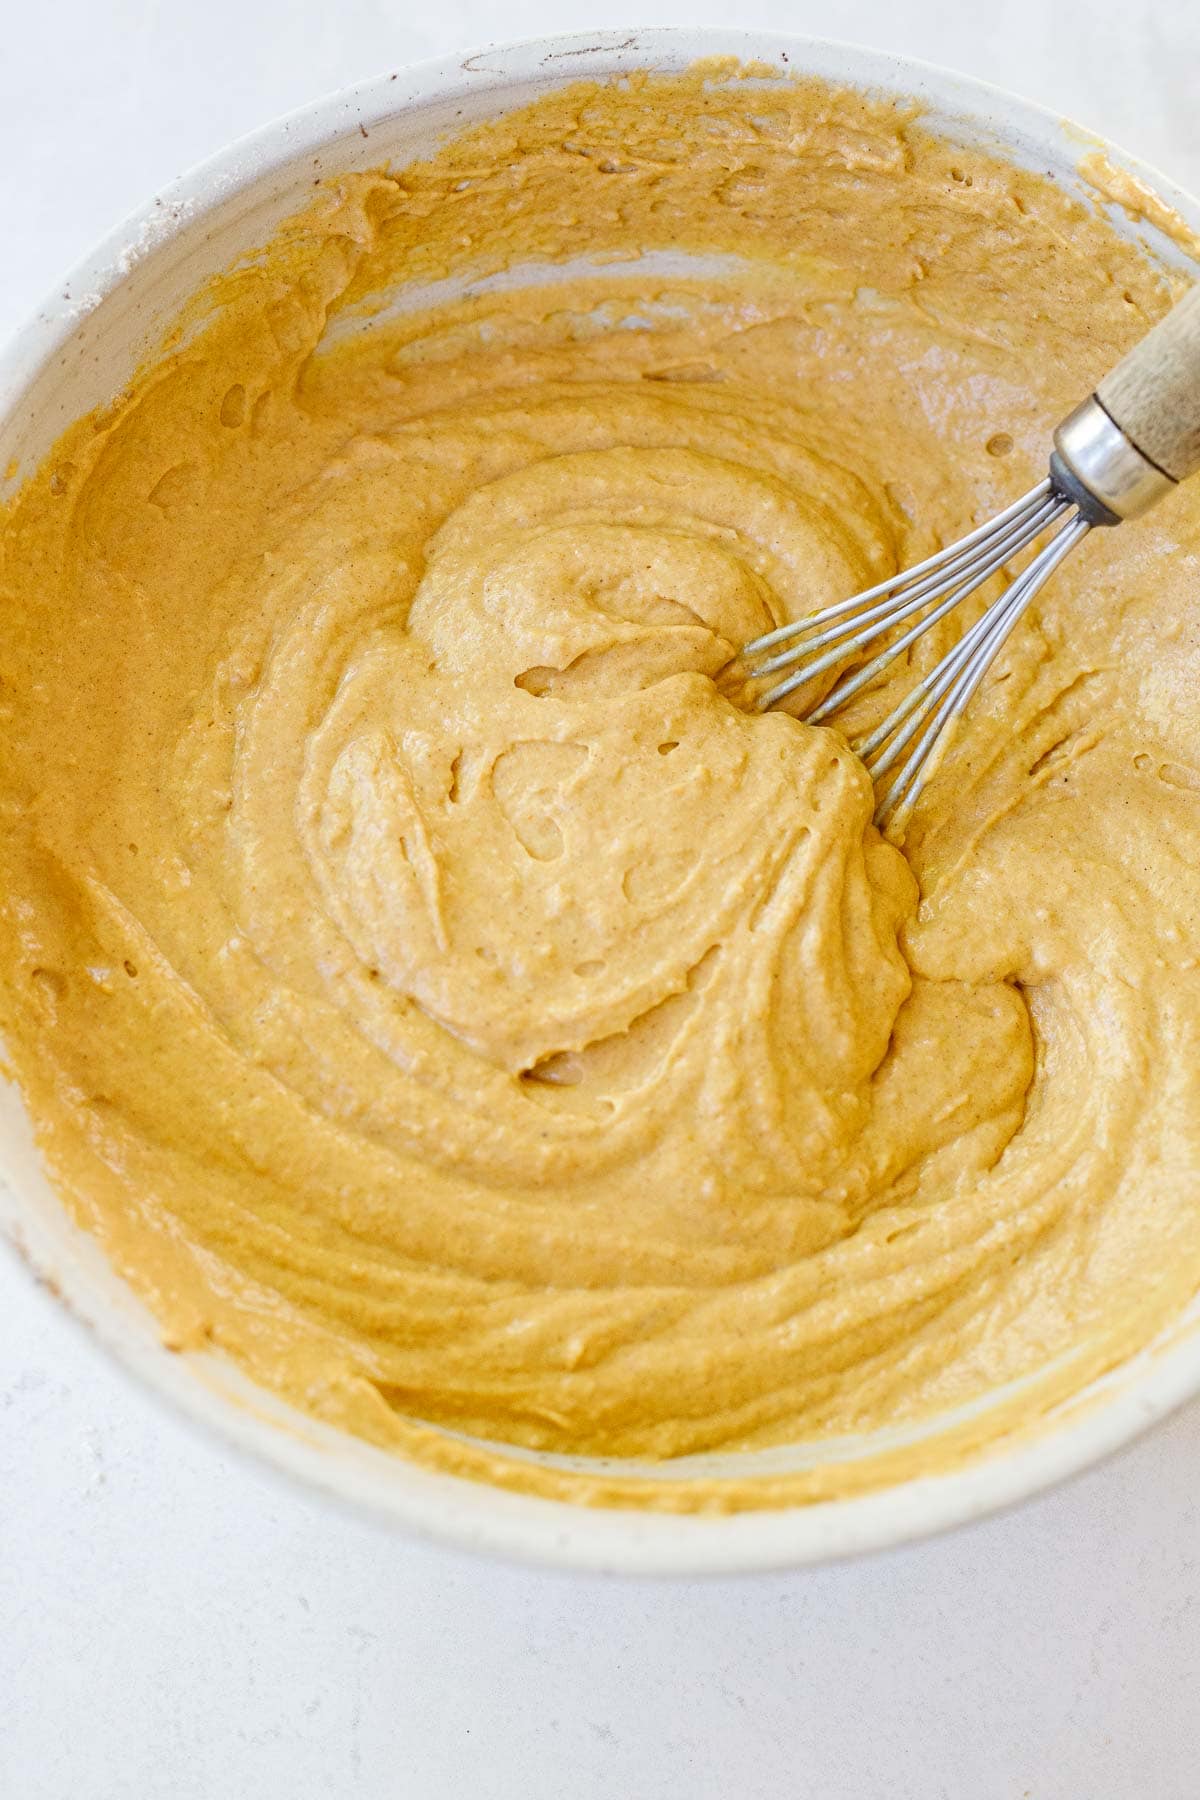 pumpkin pancake batter fully mixed together in bowl with whisk